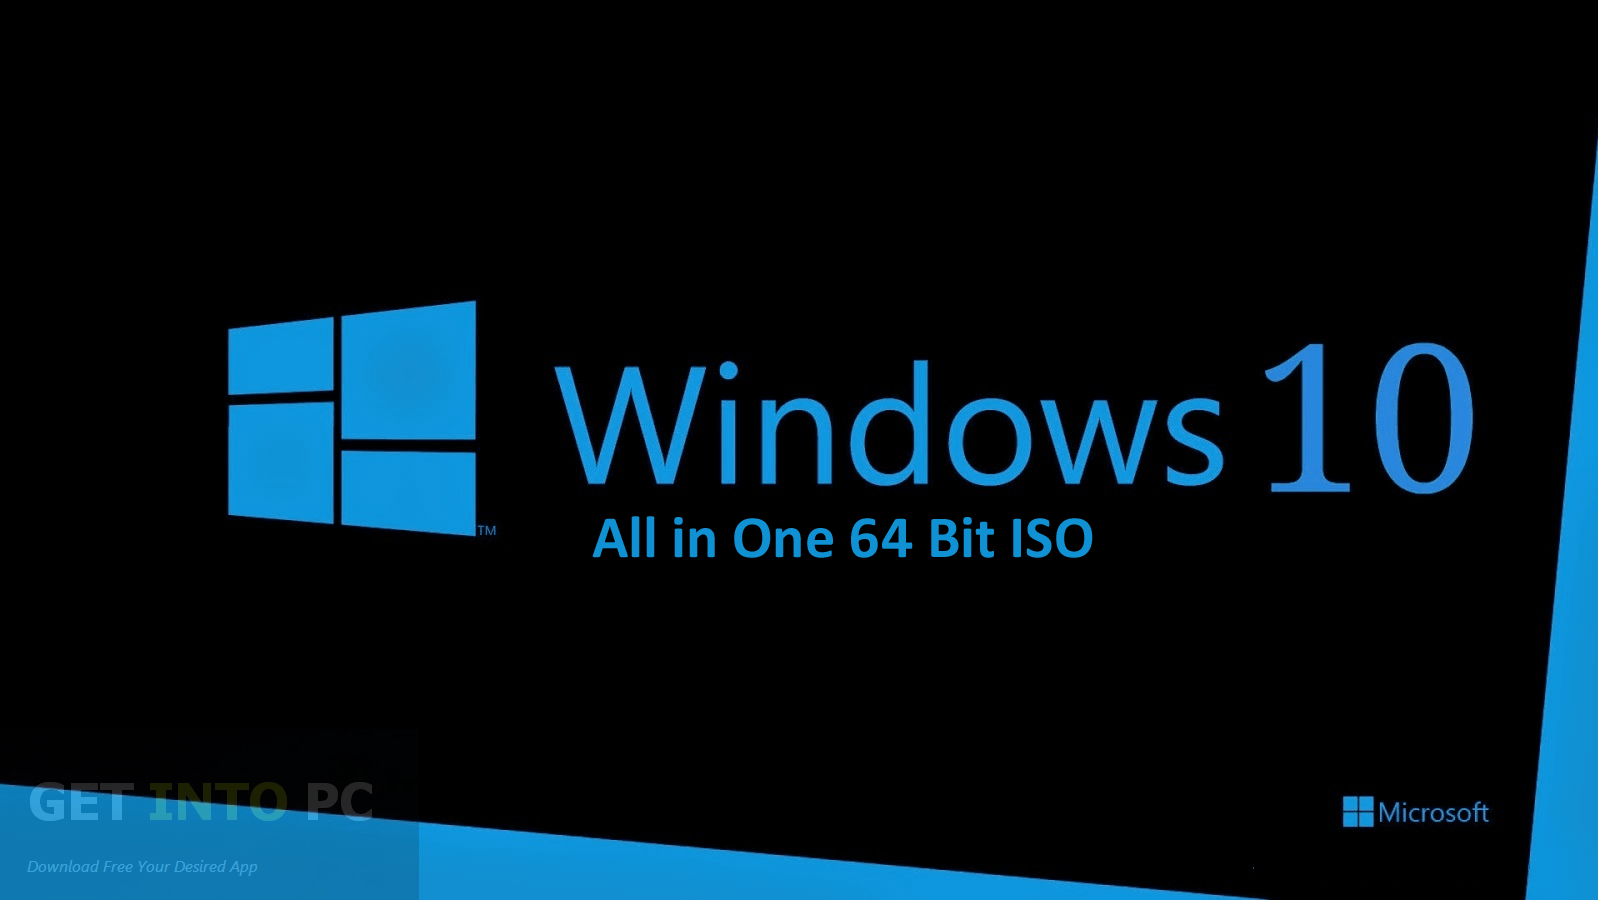 Windows 10 All in One 64 Bit ISO Free Download